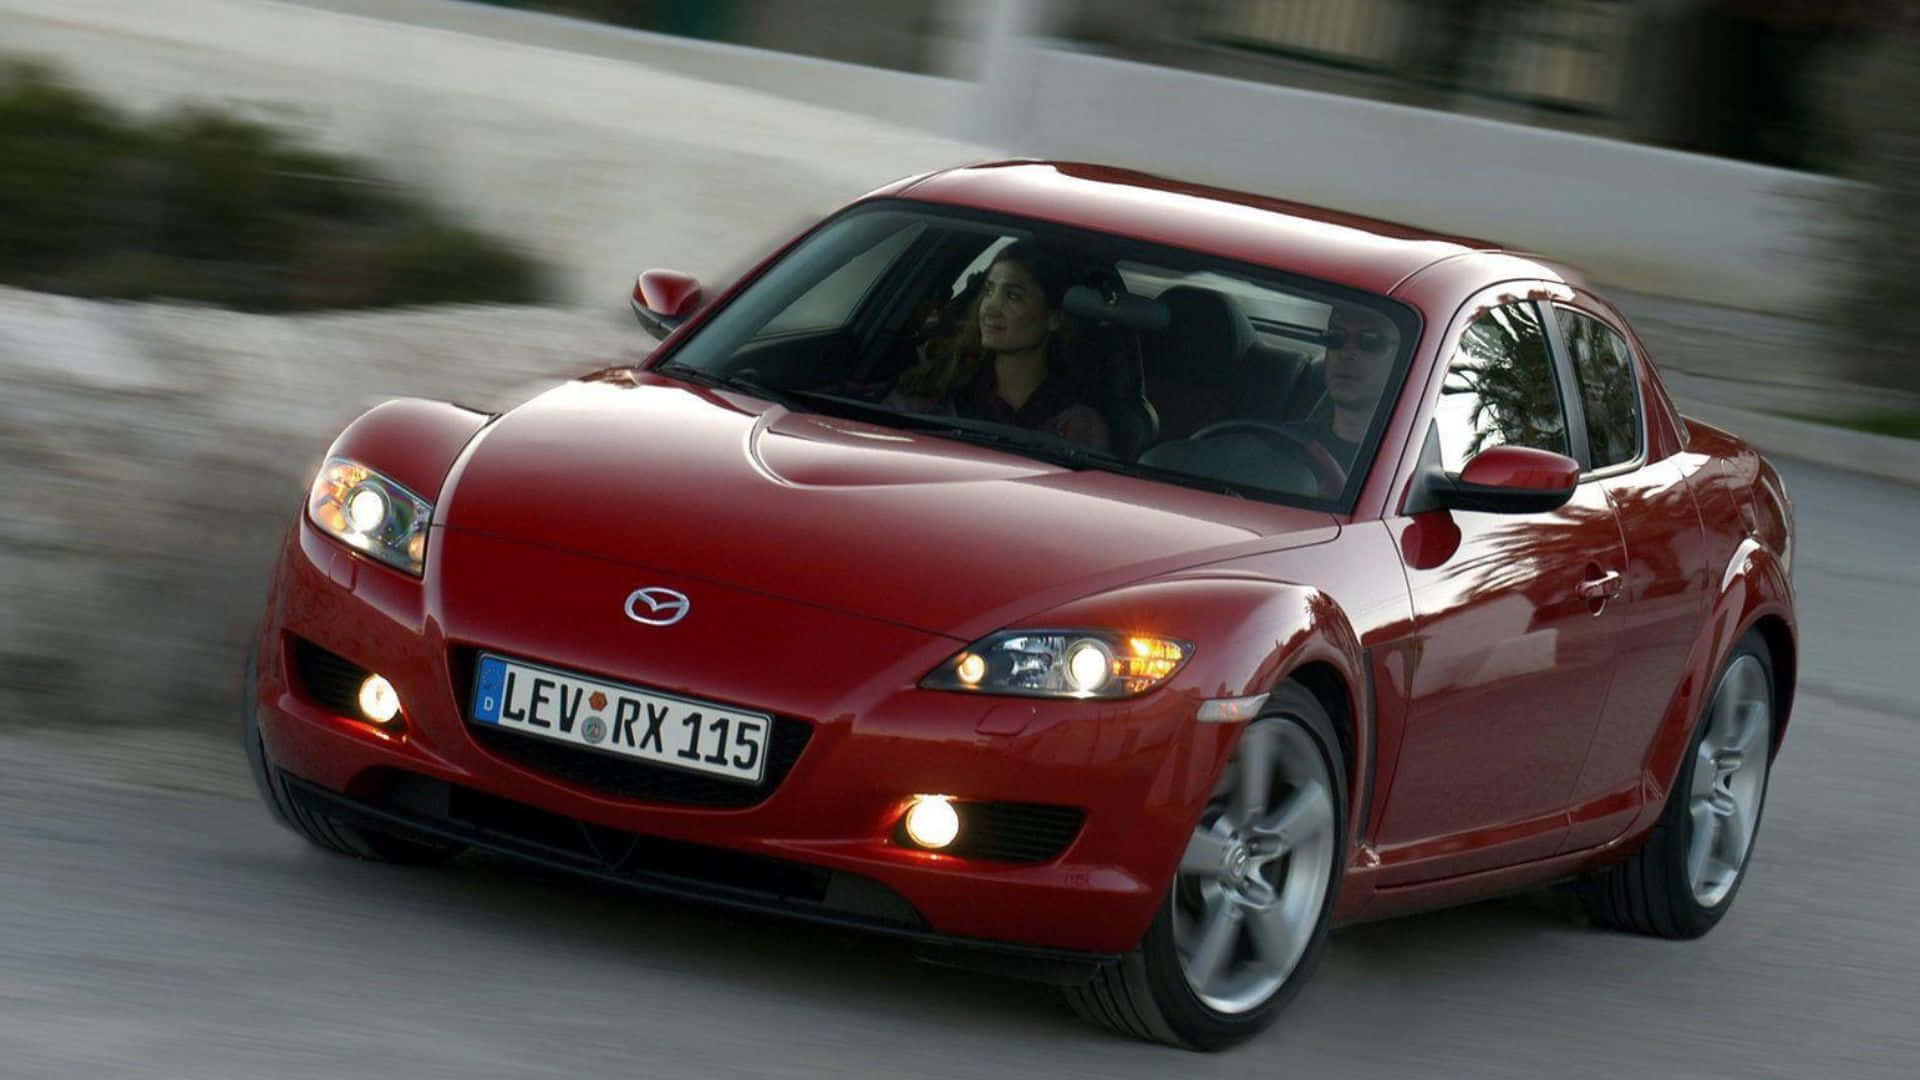 Sleek and Stylish Mazda RX-8 in Action Wallpaper